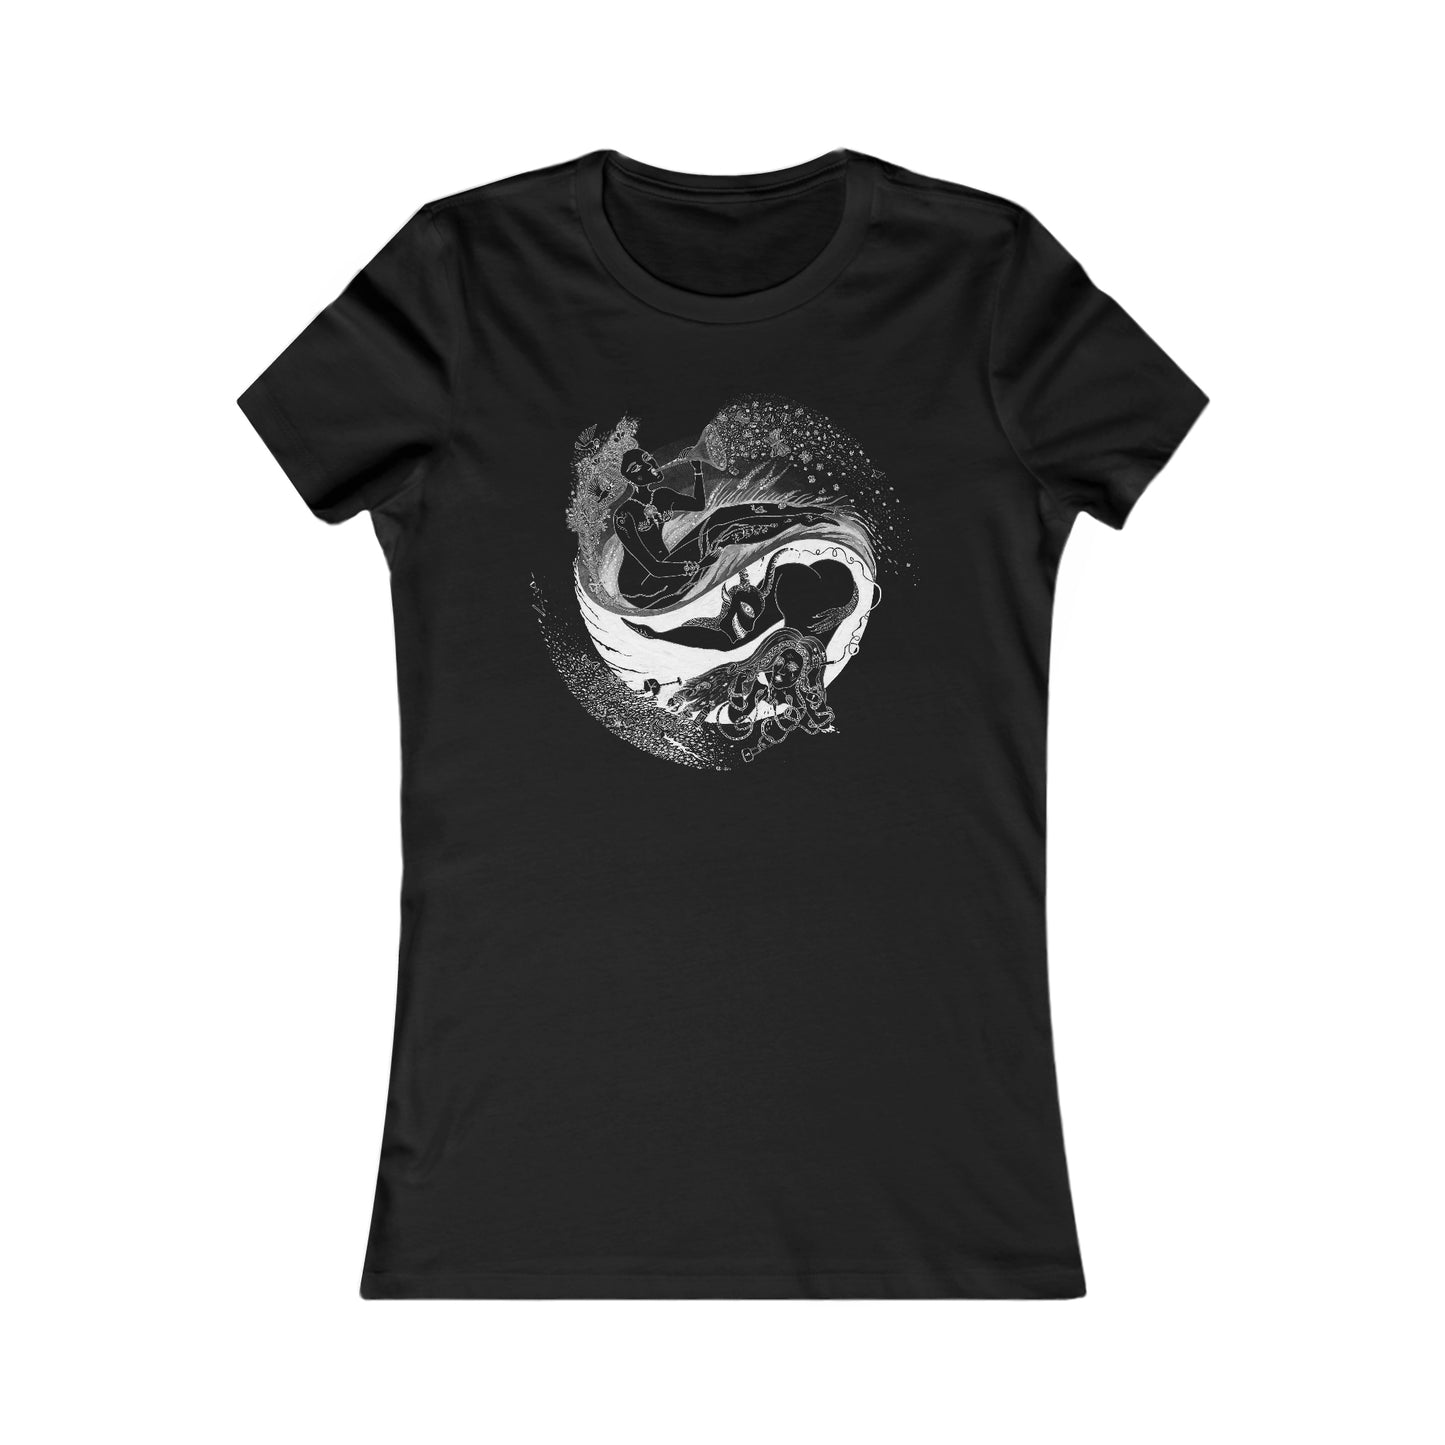 Women's Special Edition "Circle Of Wine" Slim Fit Black and White Tan Colors